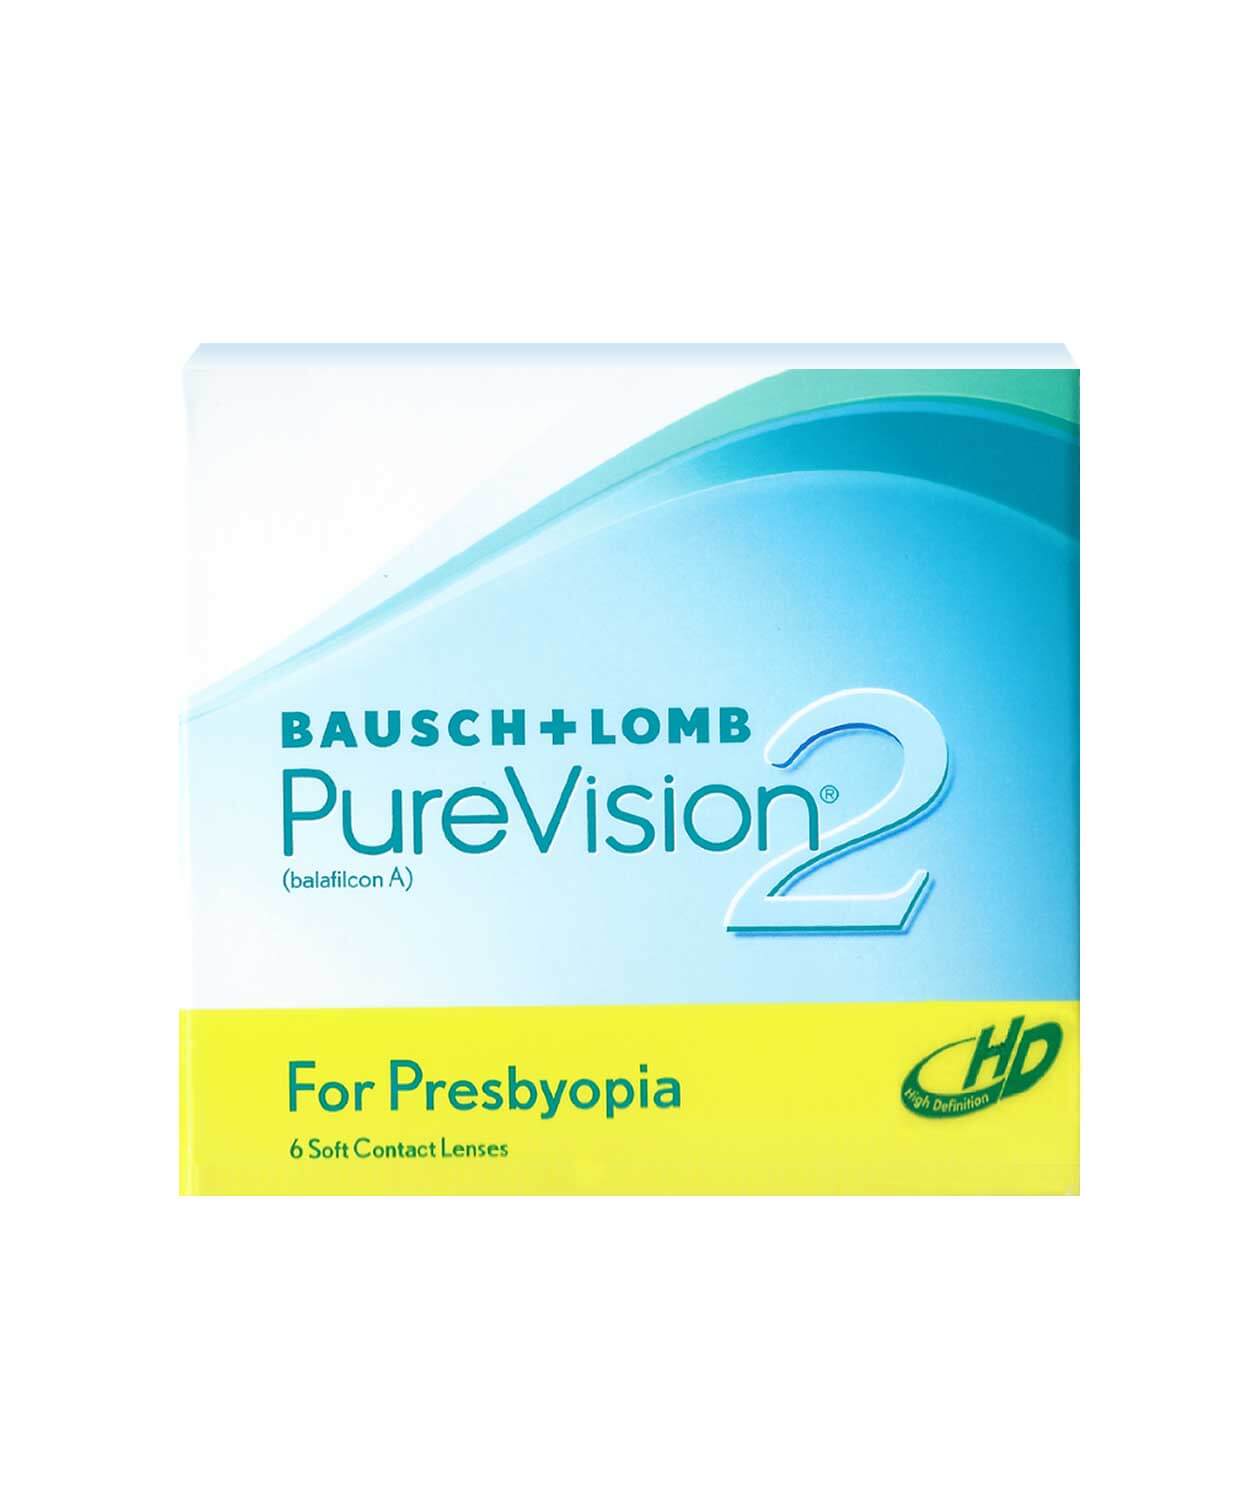 Purevision 2 multifocal contact lenses